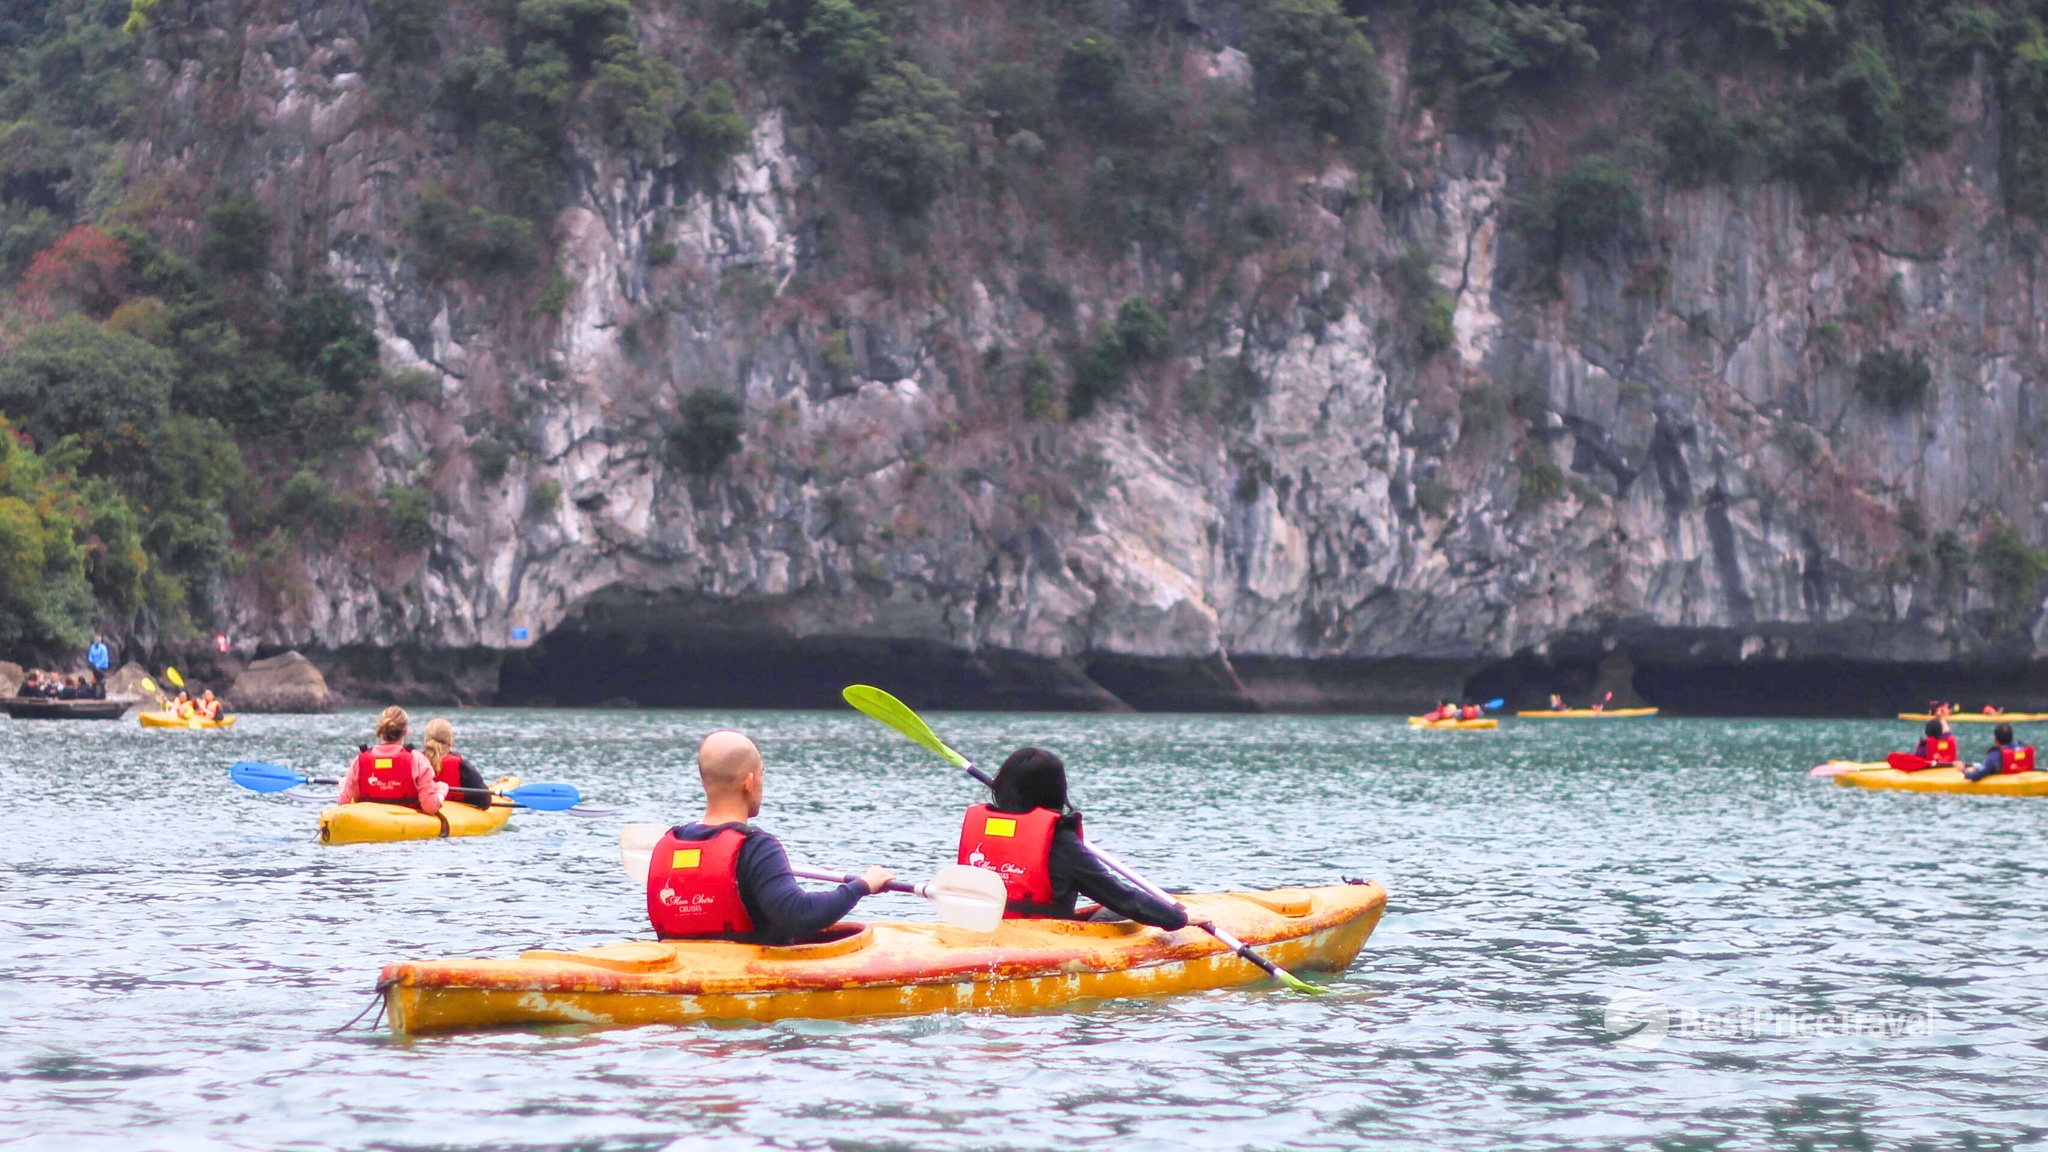 Explore the magnificent bay by kayaking